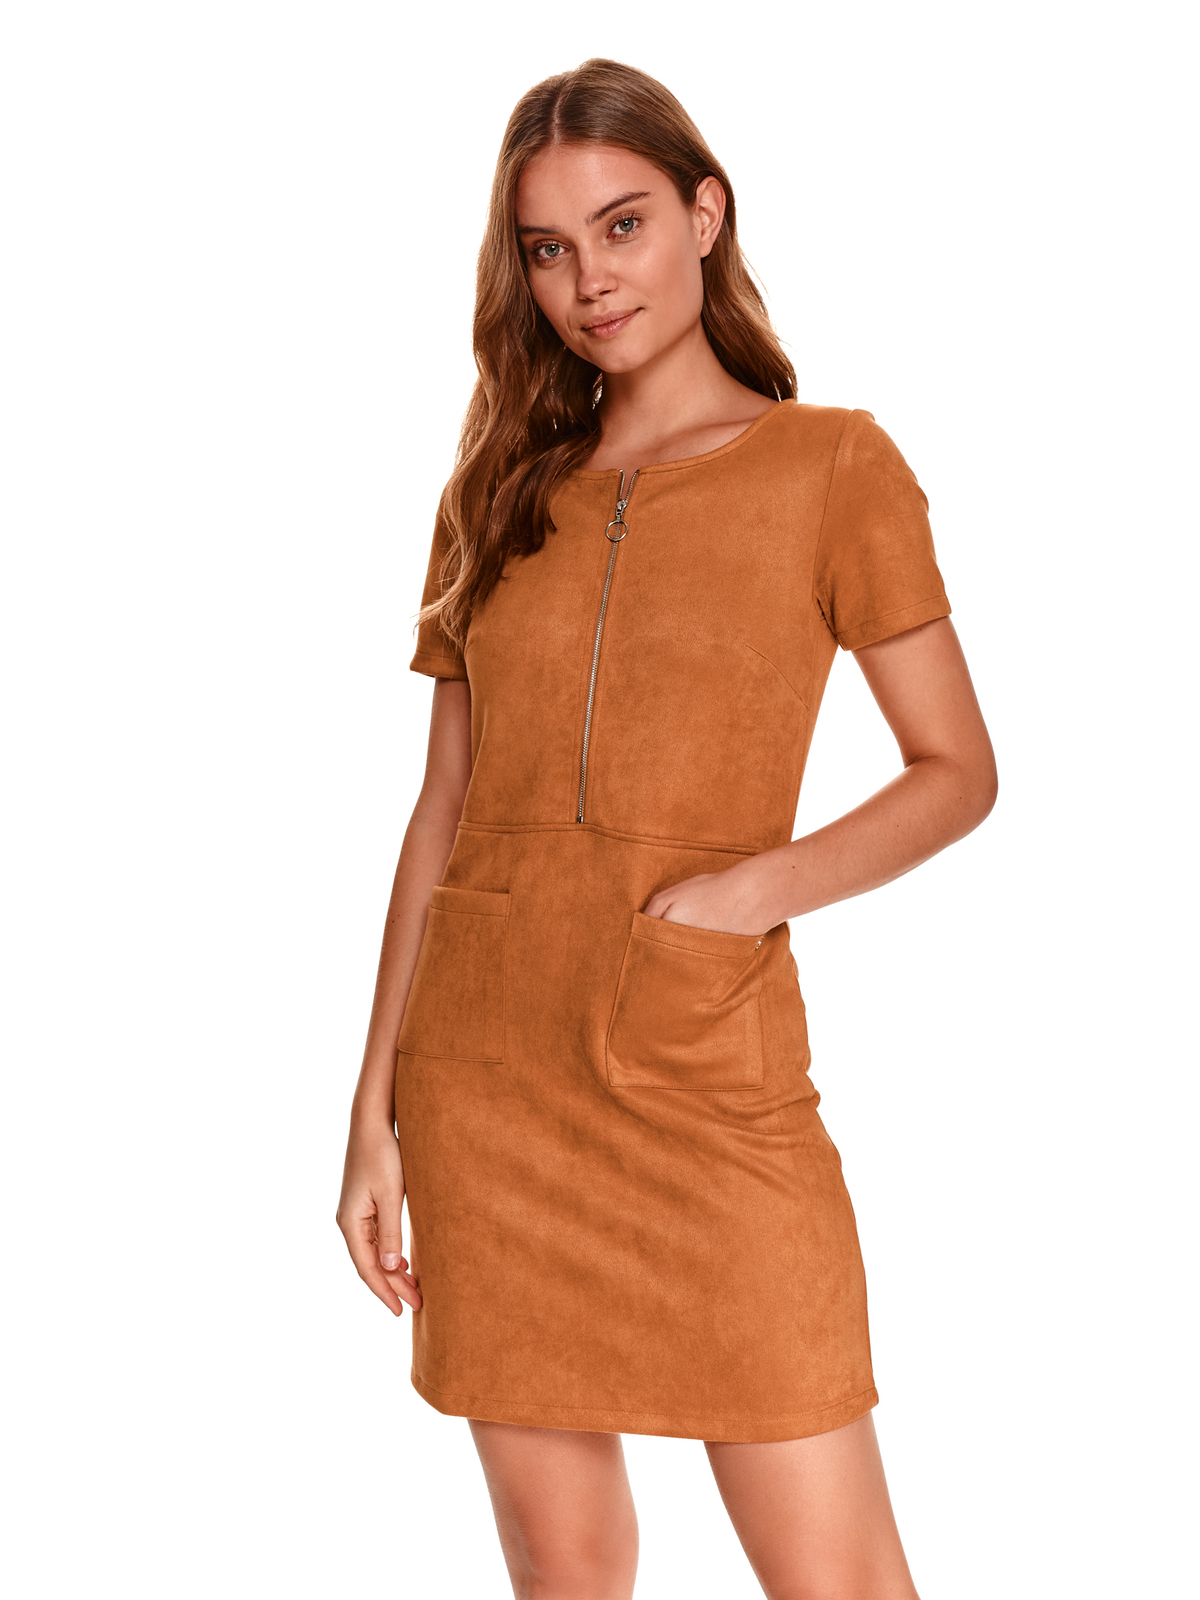 Lightbrown dress from suede pencil short cut with front pockets